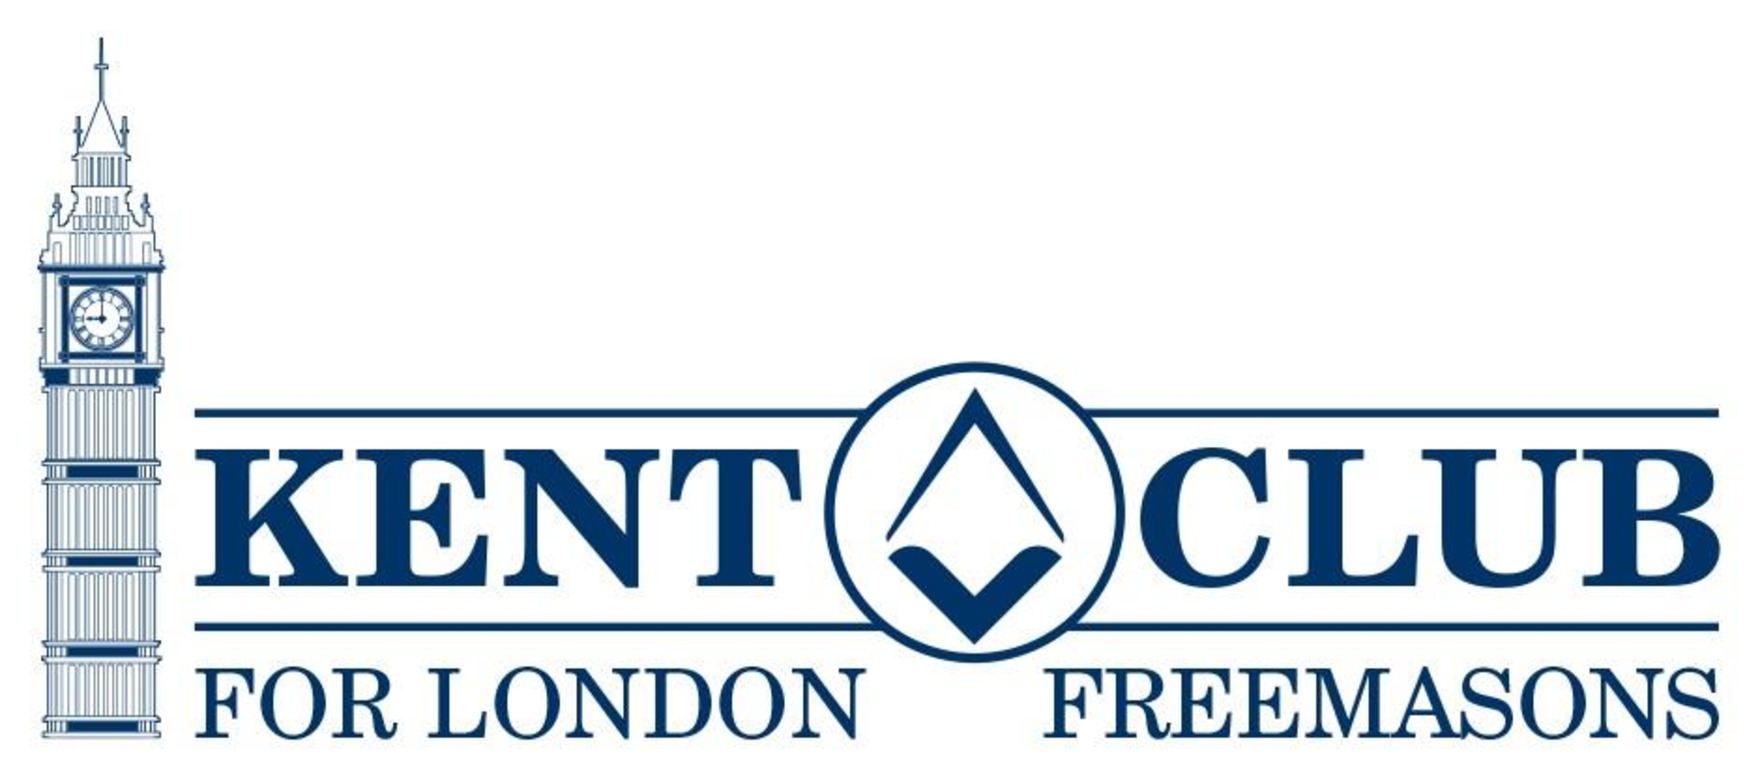 An Update from the Kent Club for London Freemasons